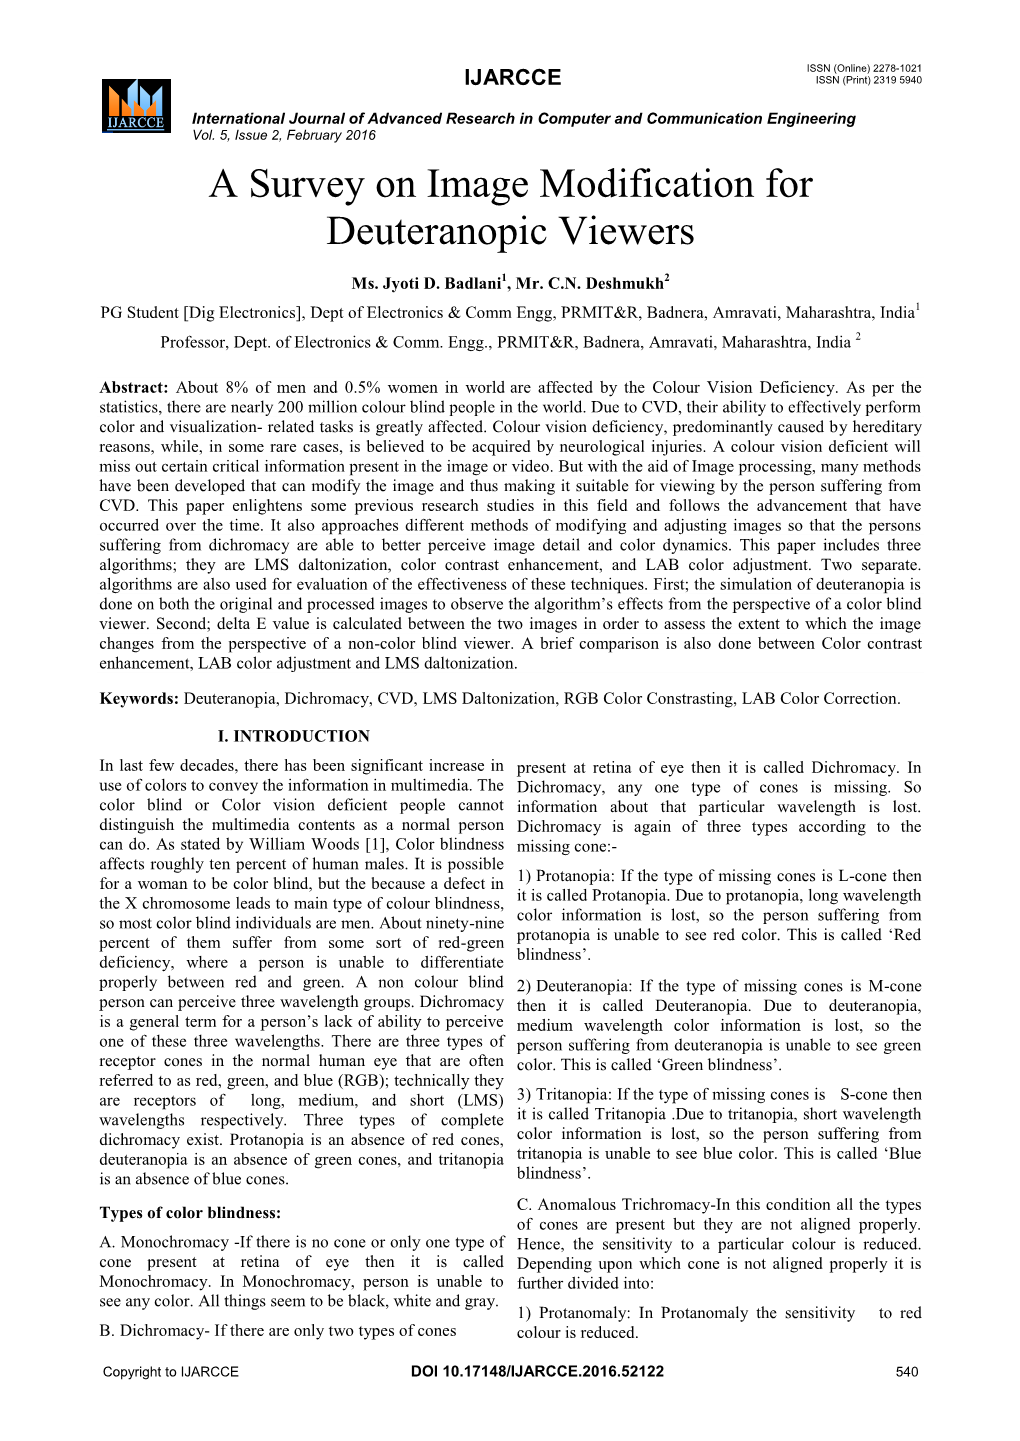 A Survey on Image Modification for Deuteranopic Viewers